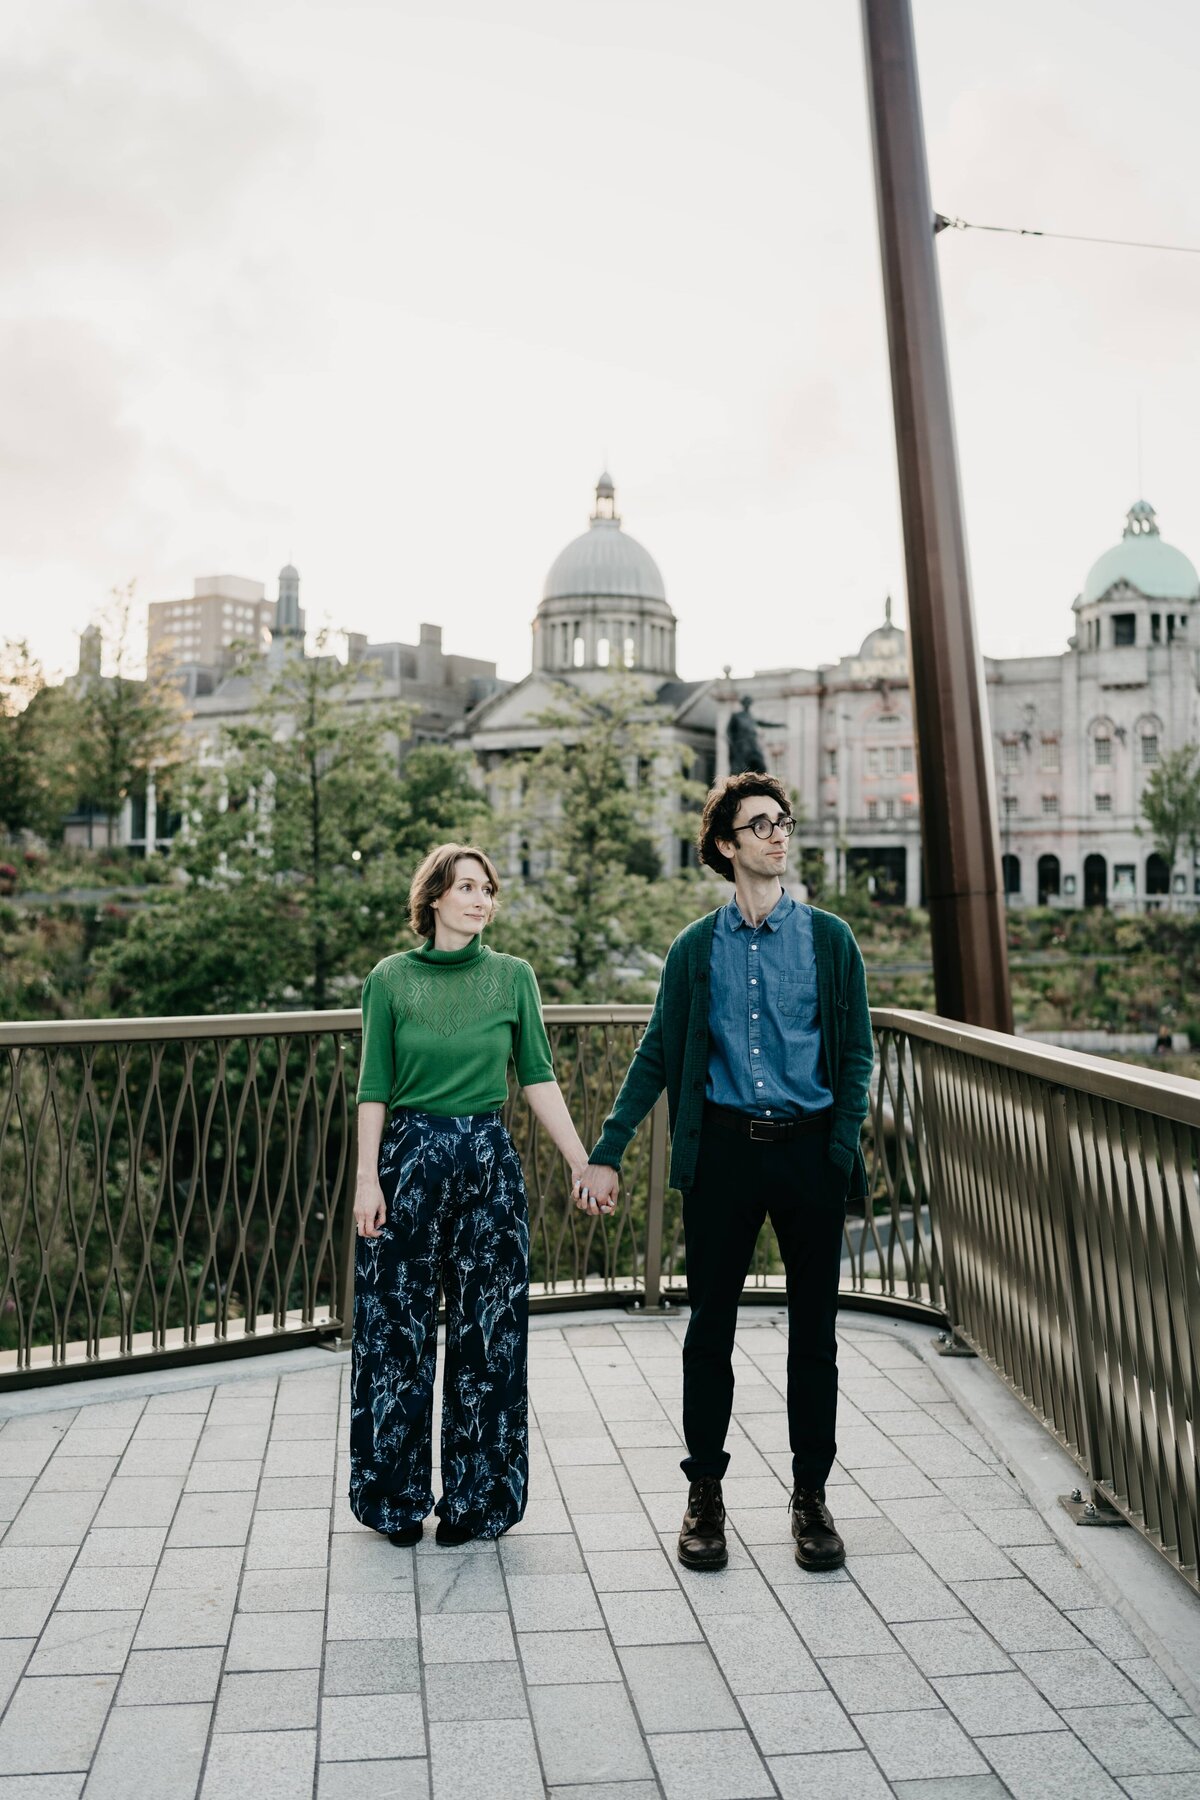 A alternative couple hold hands in Union Terrace Gardens during their enagagement photoshoot. They stand with HIs Majesty's Theatre in the background.